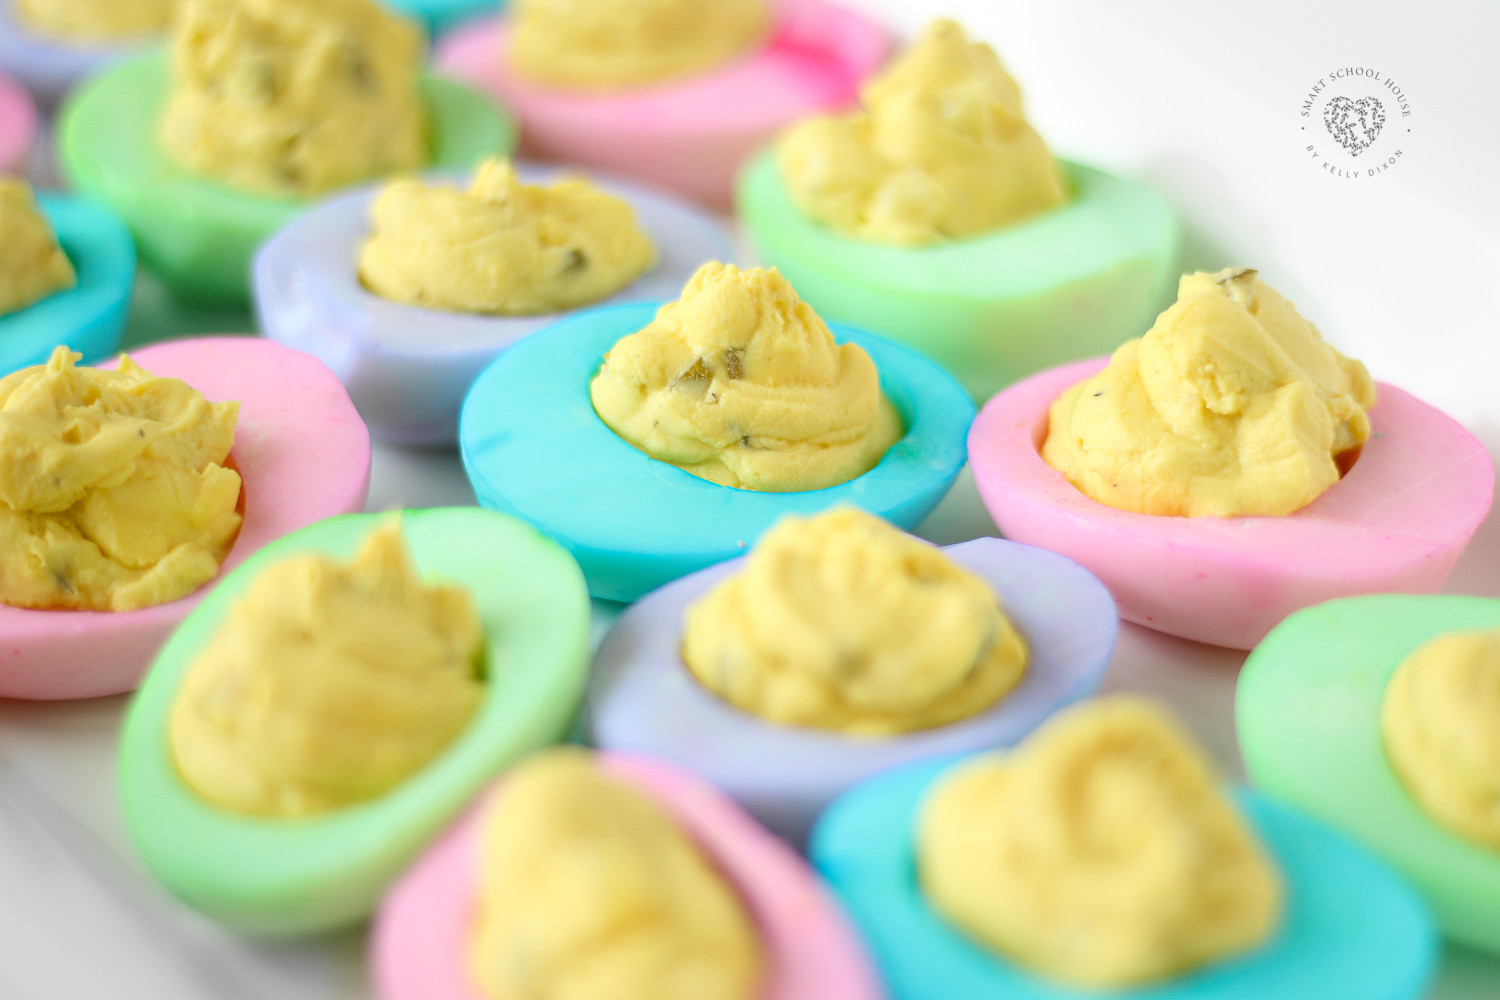 Colored Deviled Eggs For Easter
 How to Make Beautiful Pastel COLORED DEVILED EGGS for Easter